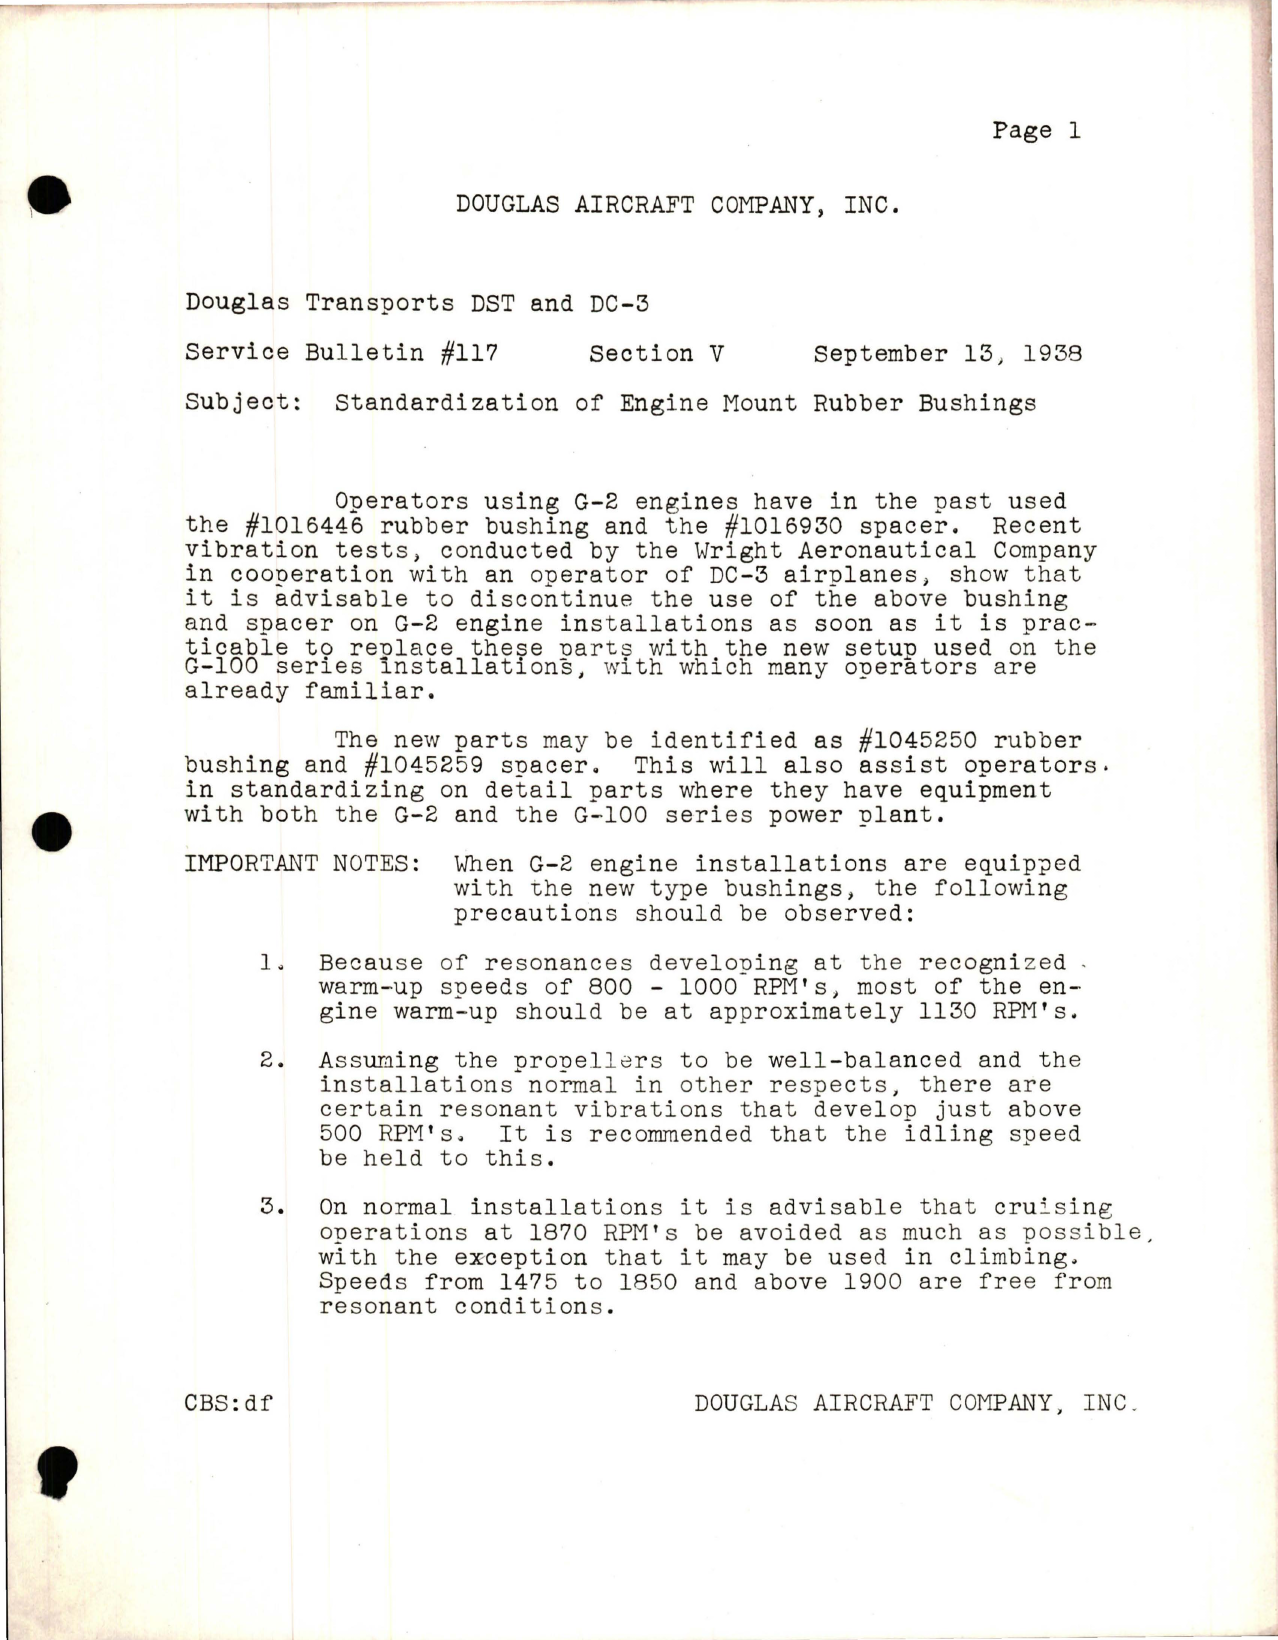 Sample page 1 from AirCorps Library document: Standardization of Engine Mount Rubber Bushings